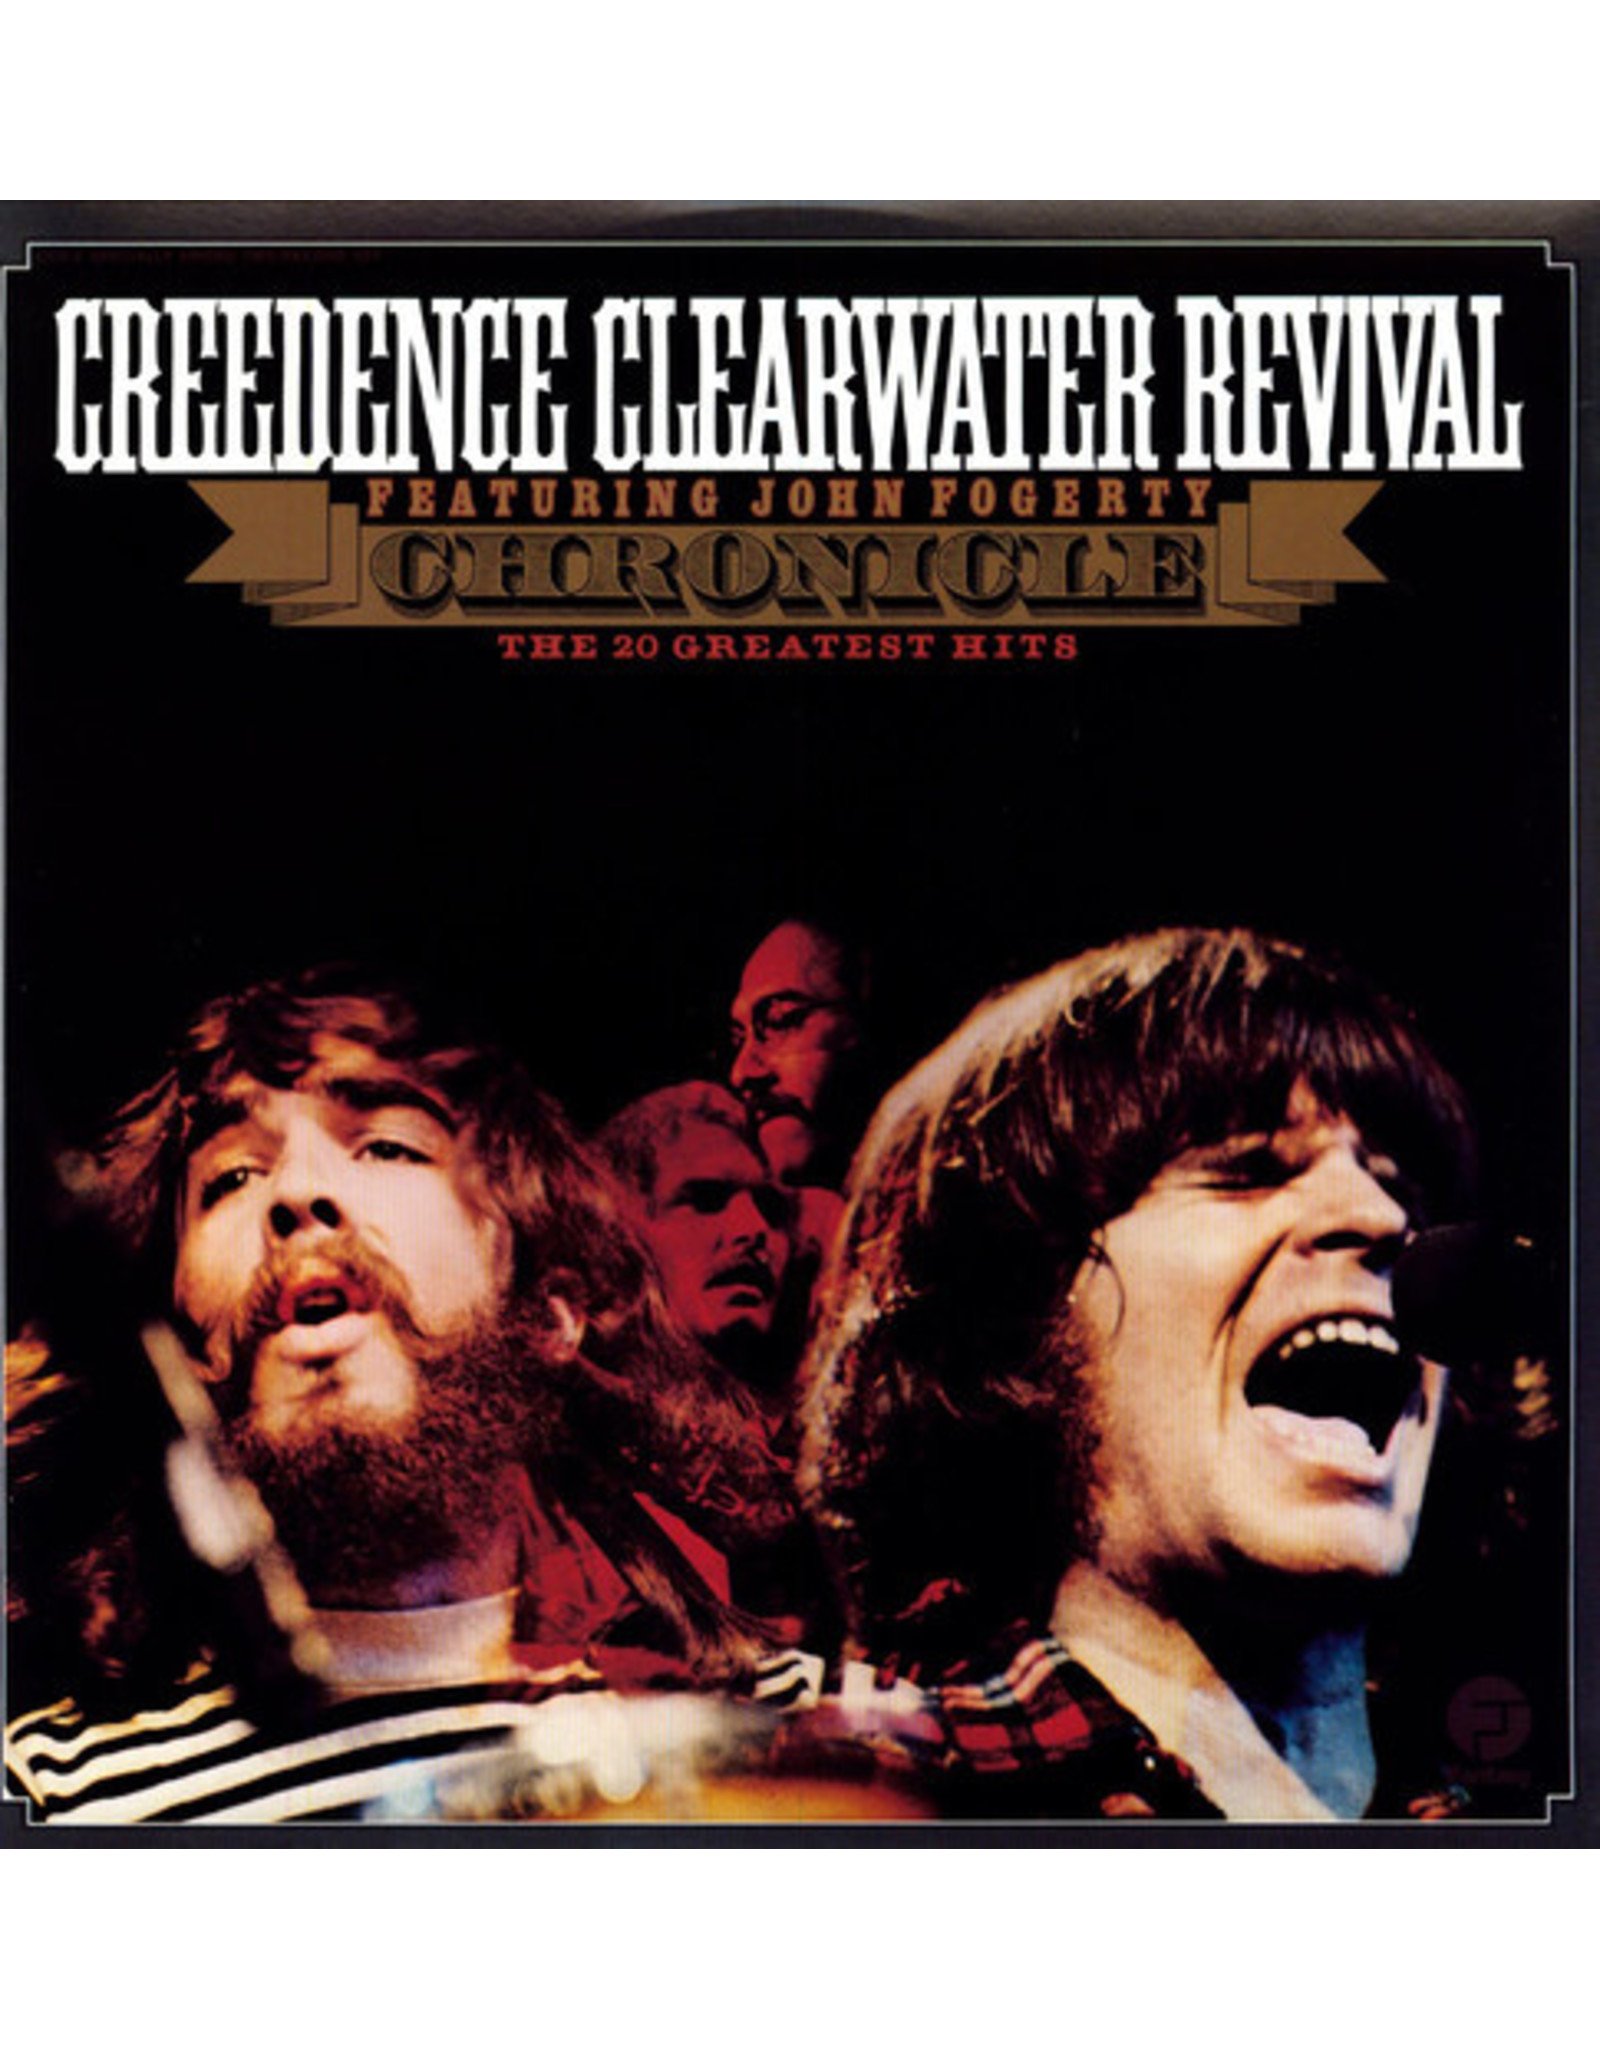 New Vinyl Creedence Clearwater Revival - Chronicle: The 20 Greatest Hits 2LP